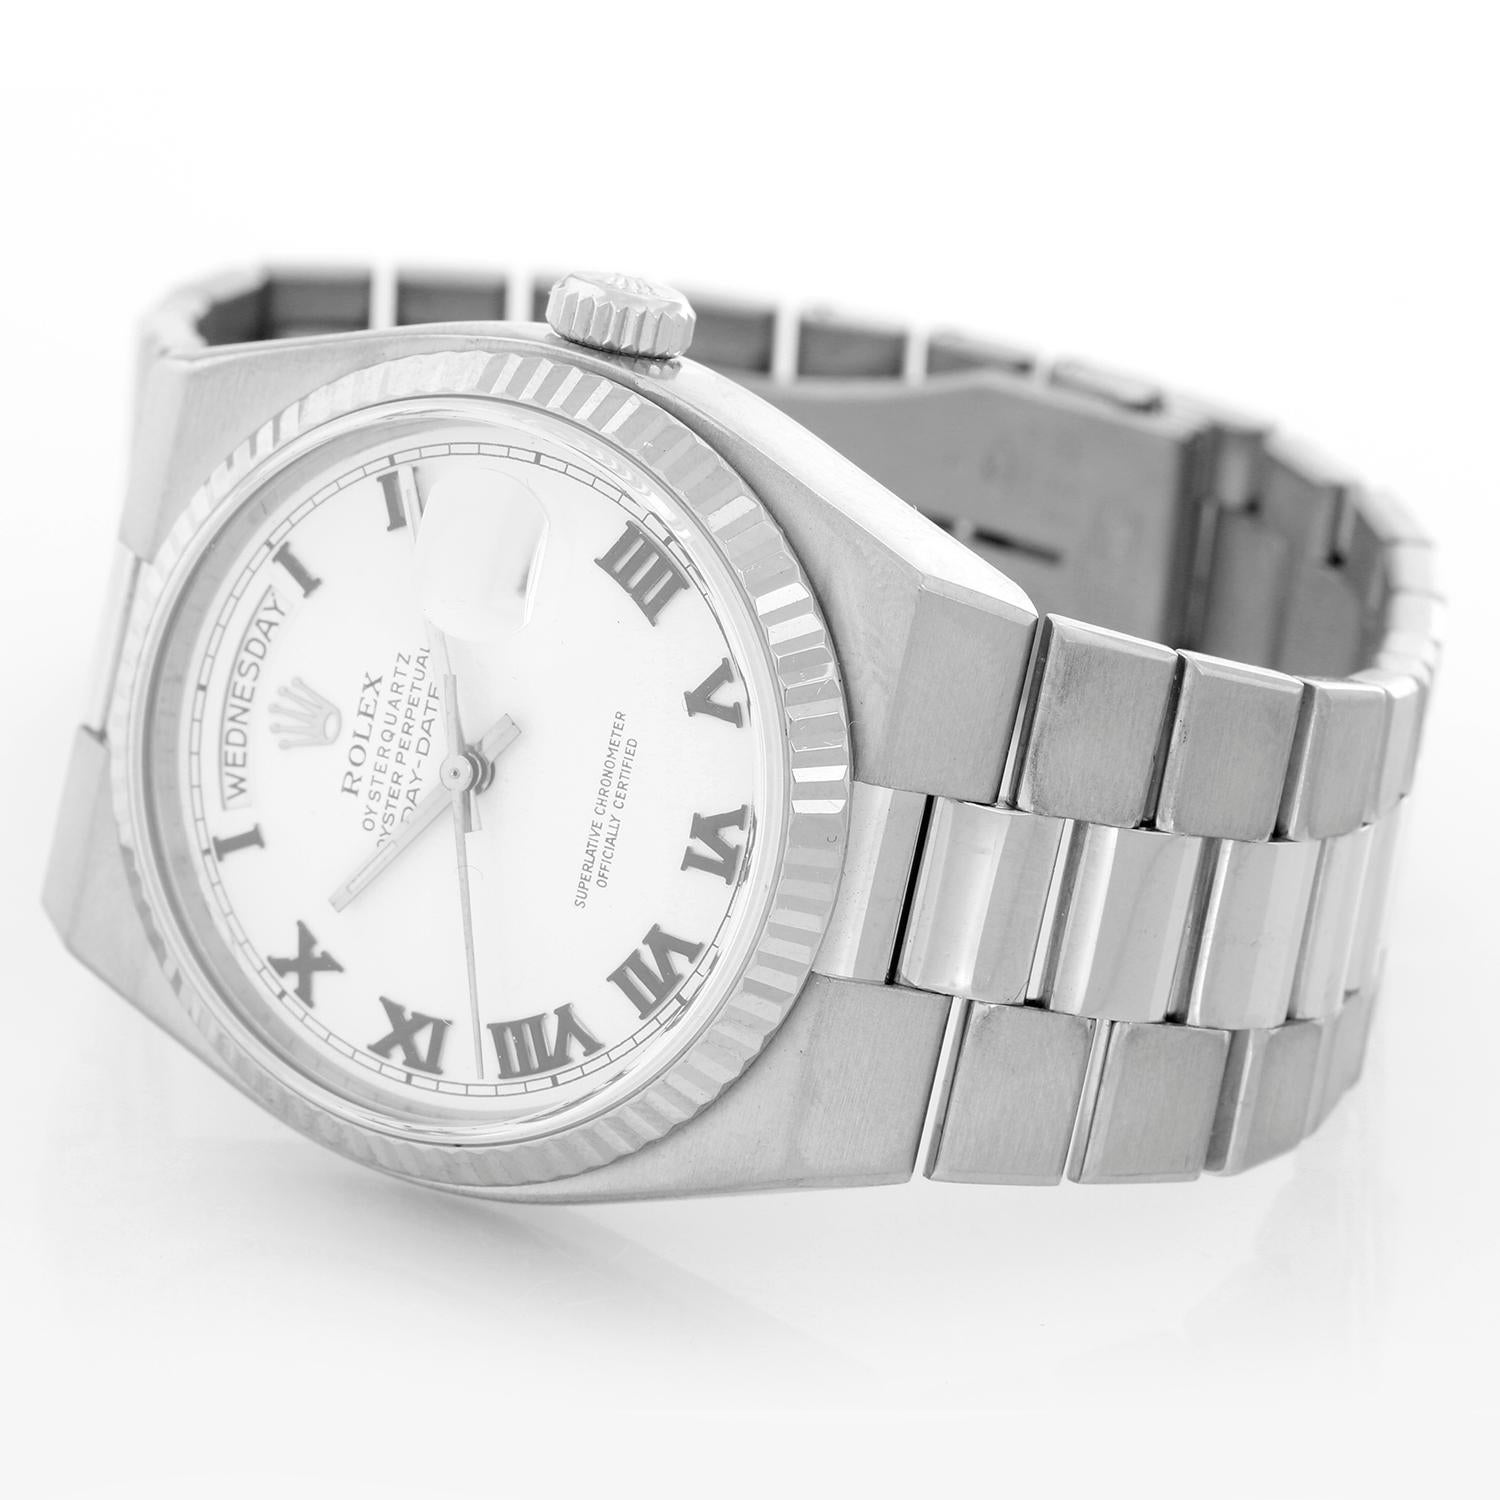 Rolex Oysterquartz Day-Date Men's 18K White Gold President Watch 19019 - Quartz; quick-set; sapphire crystal. 18k white gold case with fluted bezel (36mm diameter). White dial with raised gold Roman numerals. 18k white gold Oysterquartz hidden-clasp